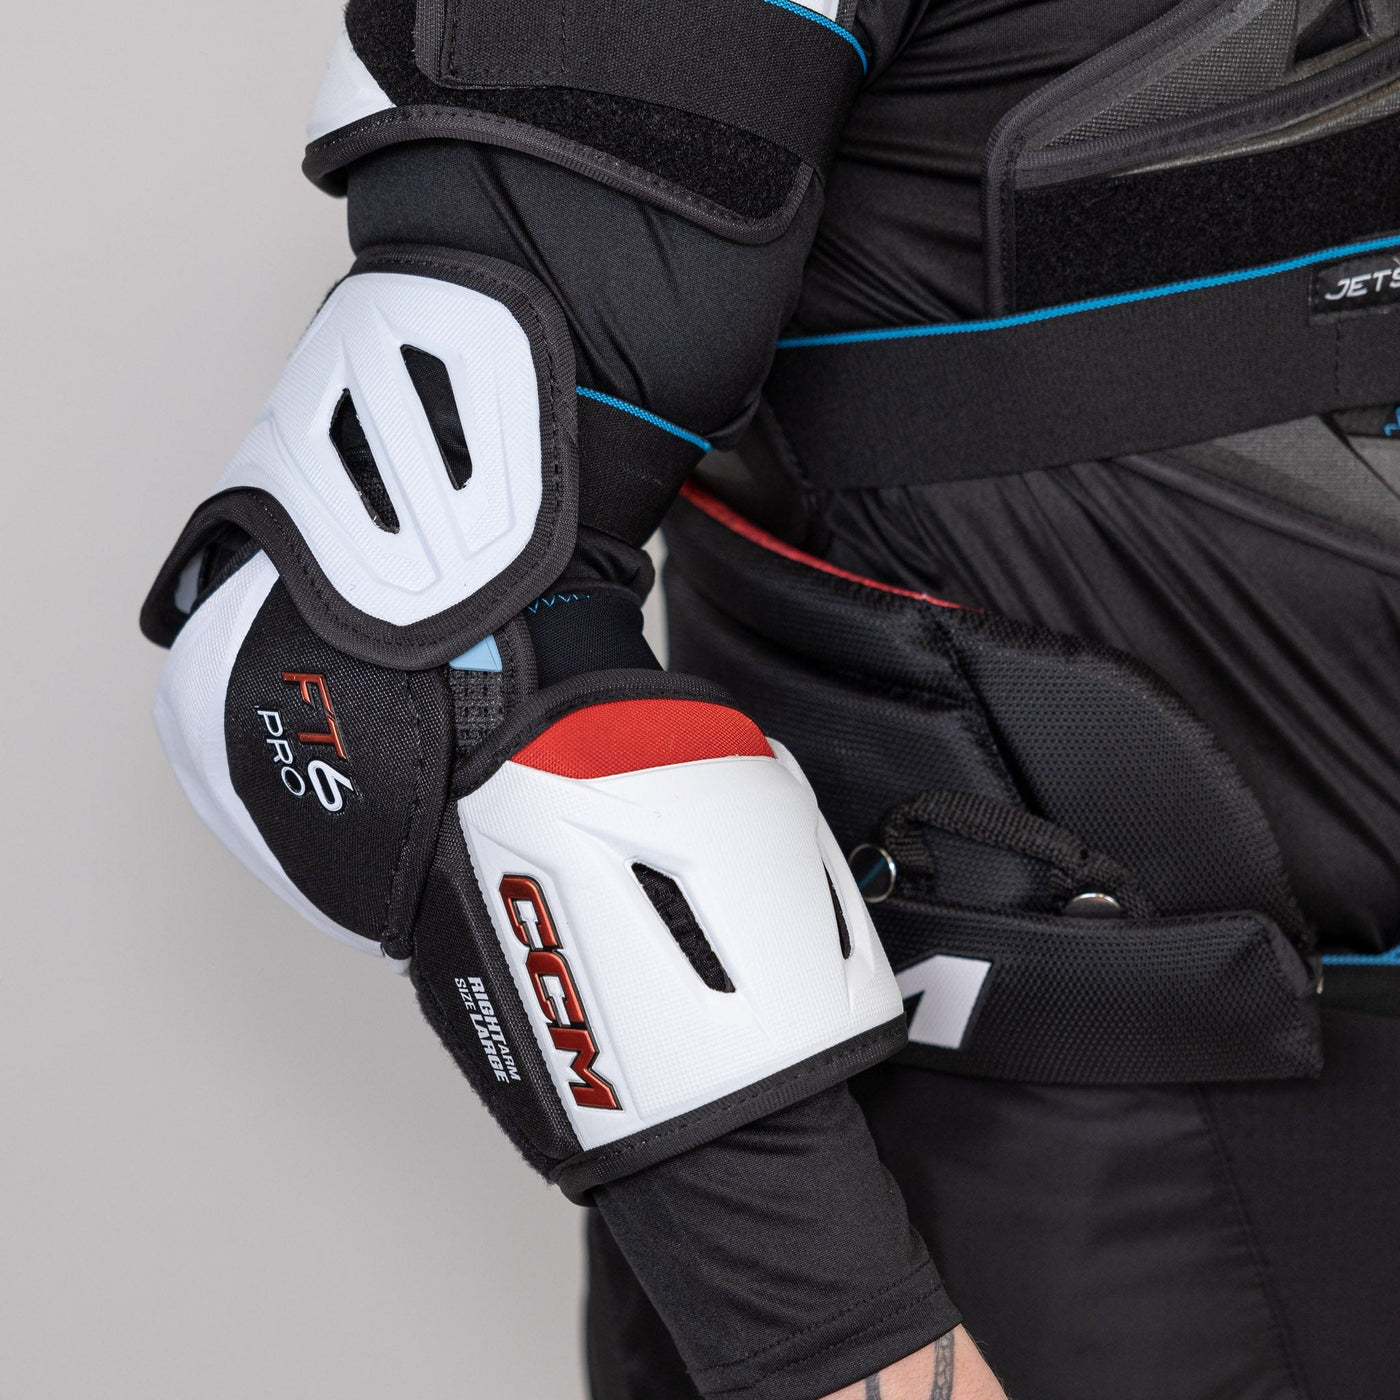 CCM Jetspeed FT6 Pro Junior Hockey Elbow Pads - The Hockey Shop Source For Sports